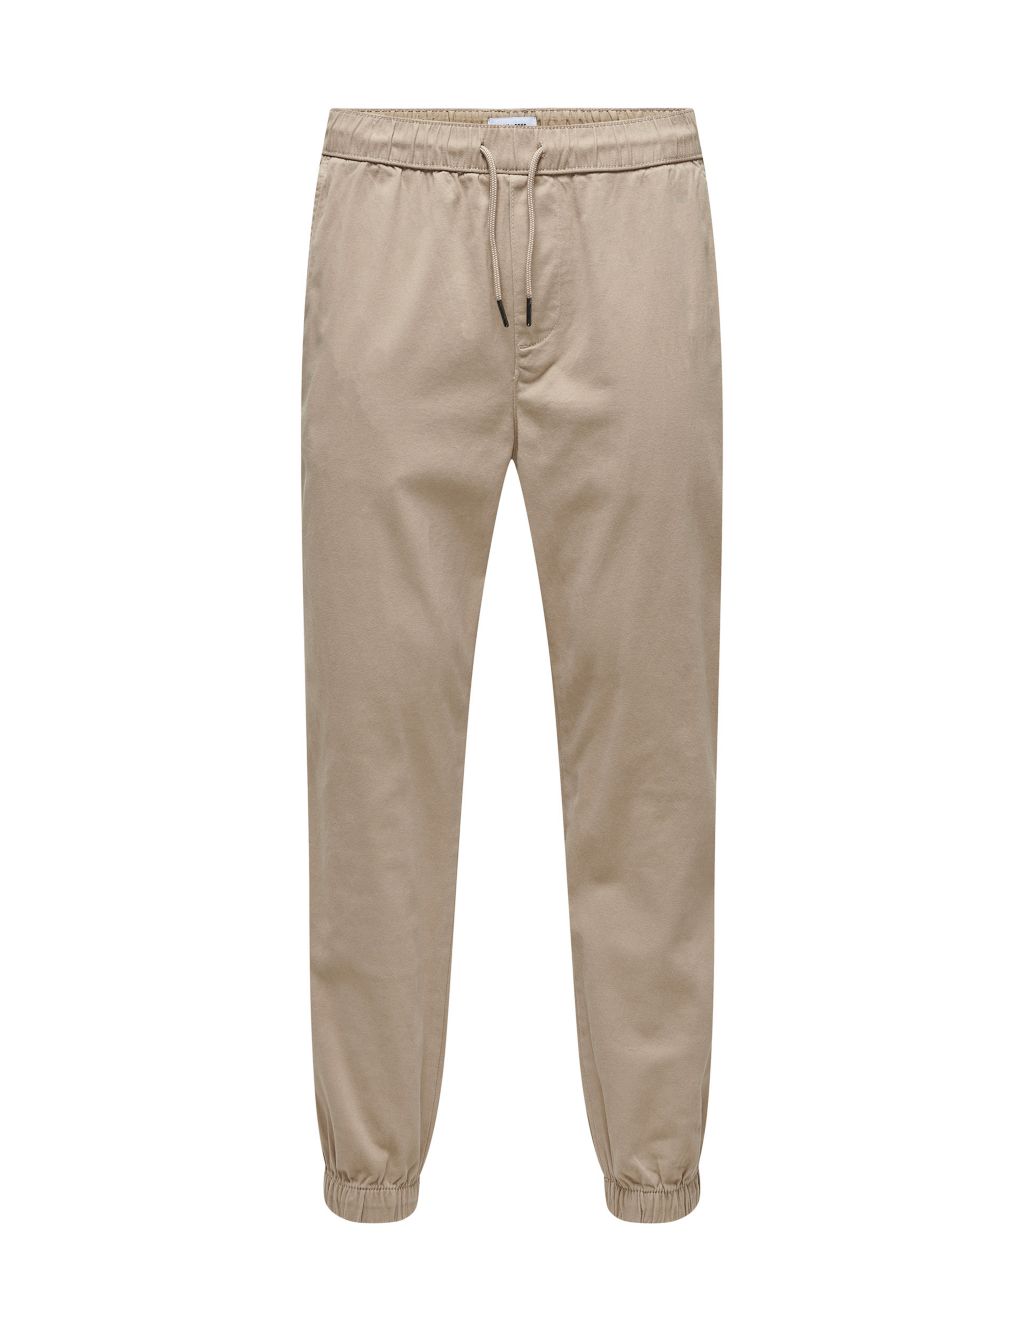 Tapered Fit Cuffed Chinos image 2